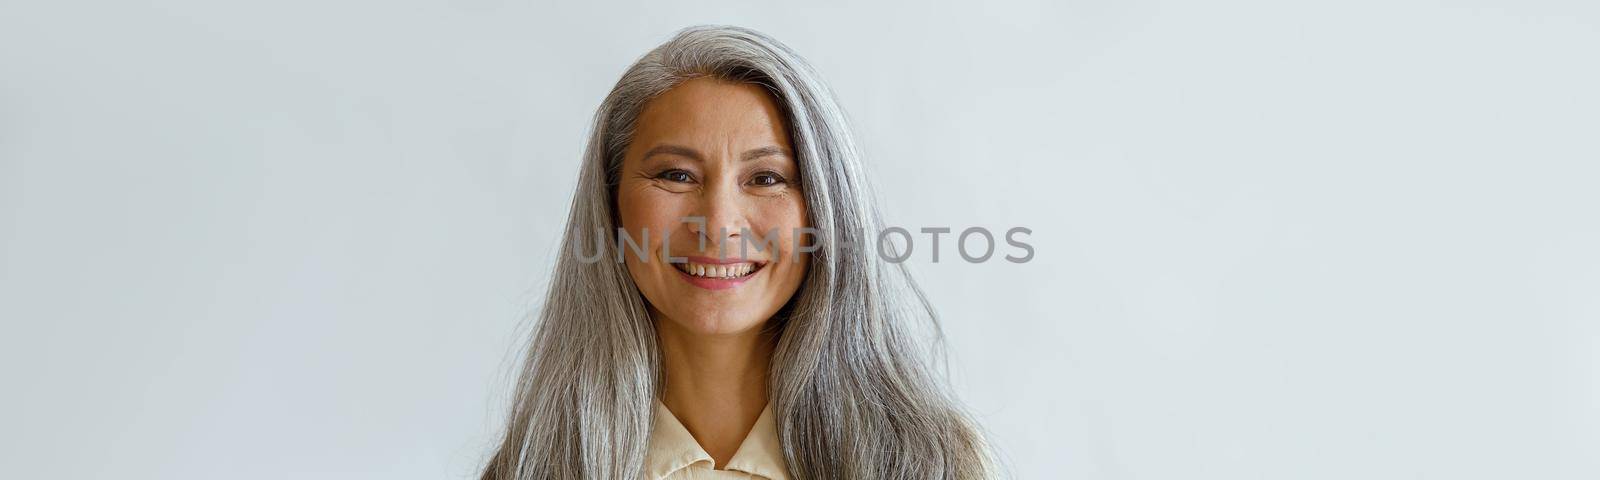 Portrait of smiling Asian woman with long hoary hair and crossed arms standing on light grey background in studio. Mature beauty lifestyle